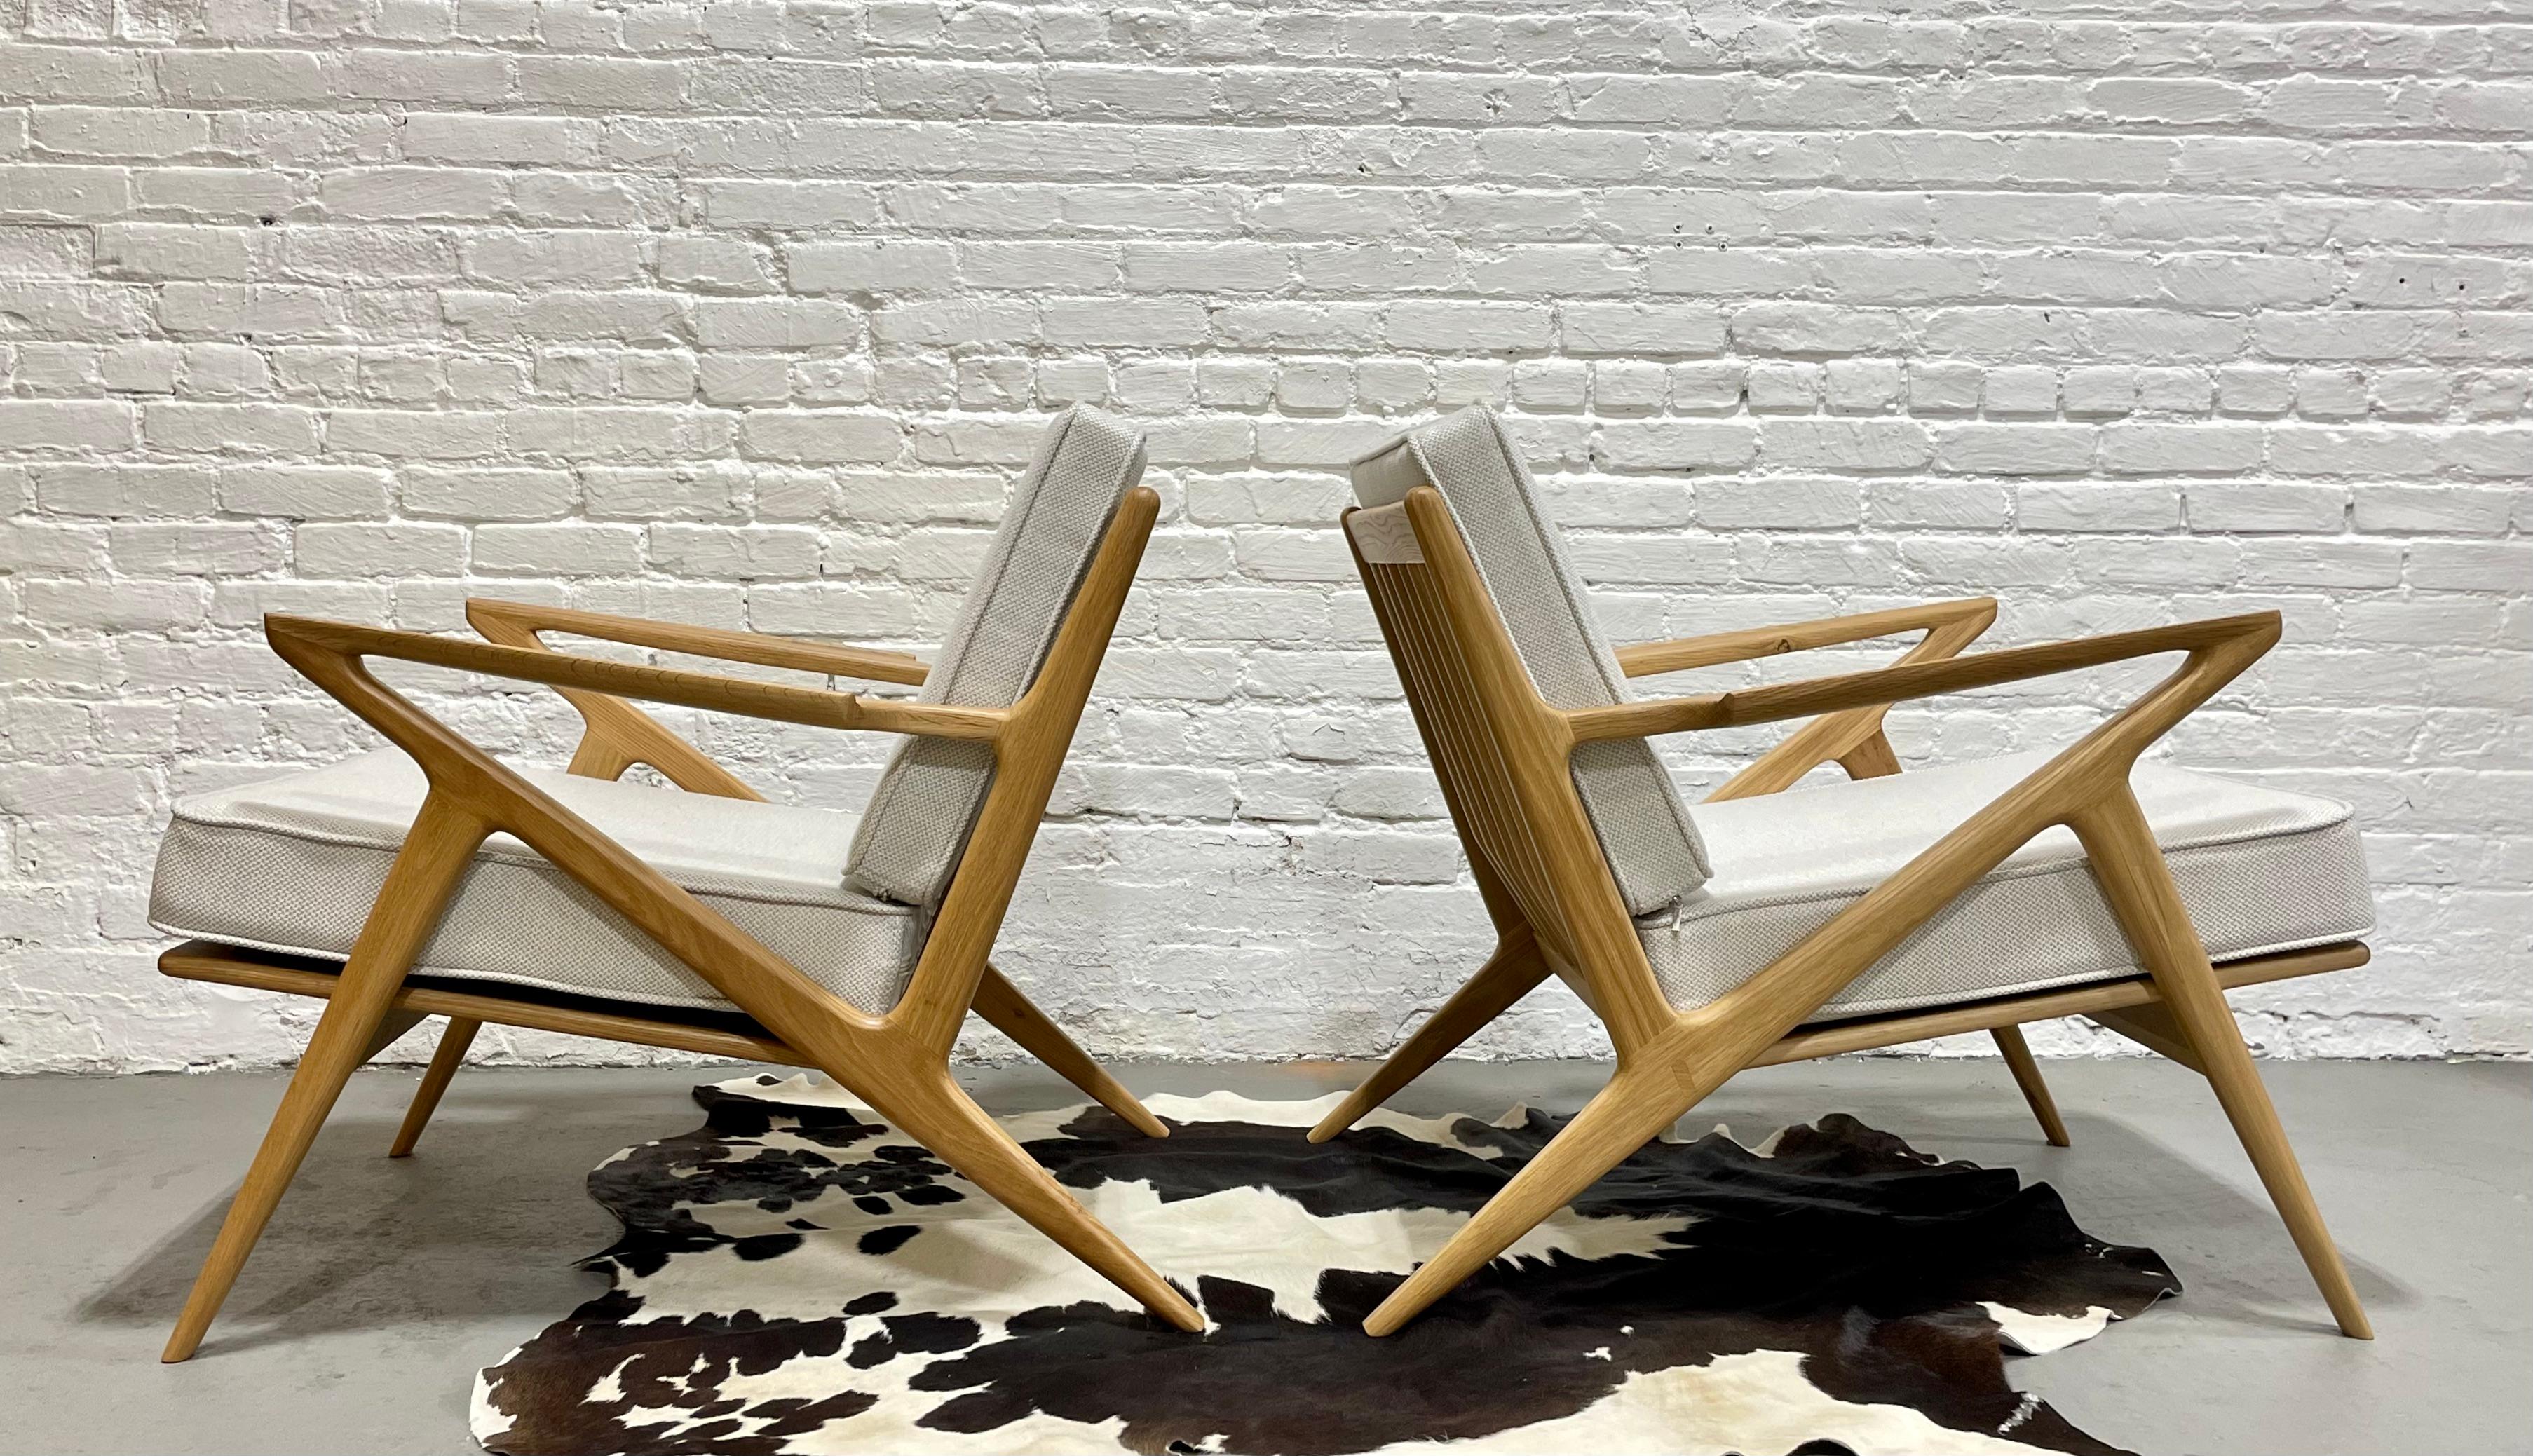 Pair of Mid-Century Modern styled lounge chairs, intricately handcrafted and designed in solid oak. This incredible set offers loads of design details such as sculptured armrests, triangular back slats and stunning wood grains. The cushions are high